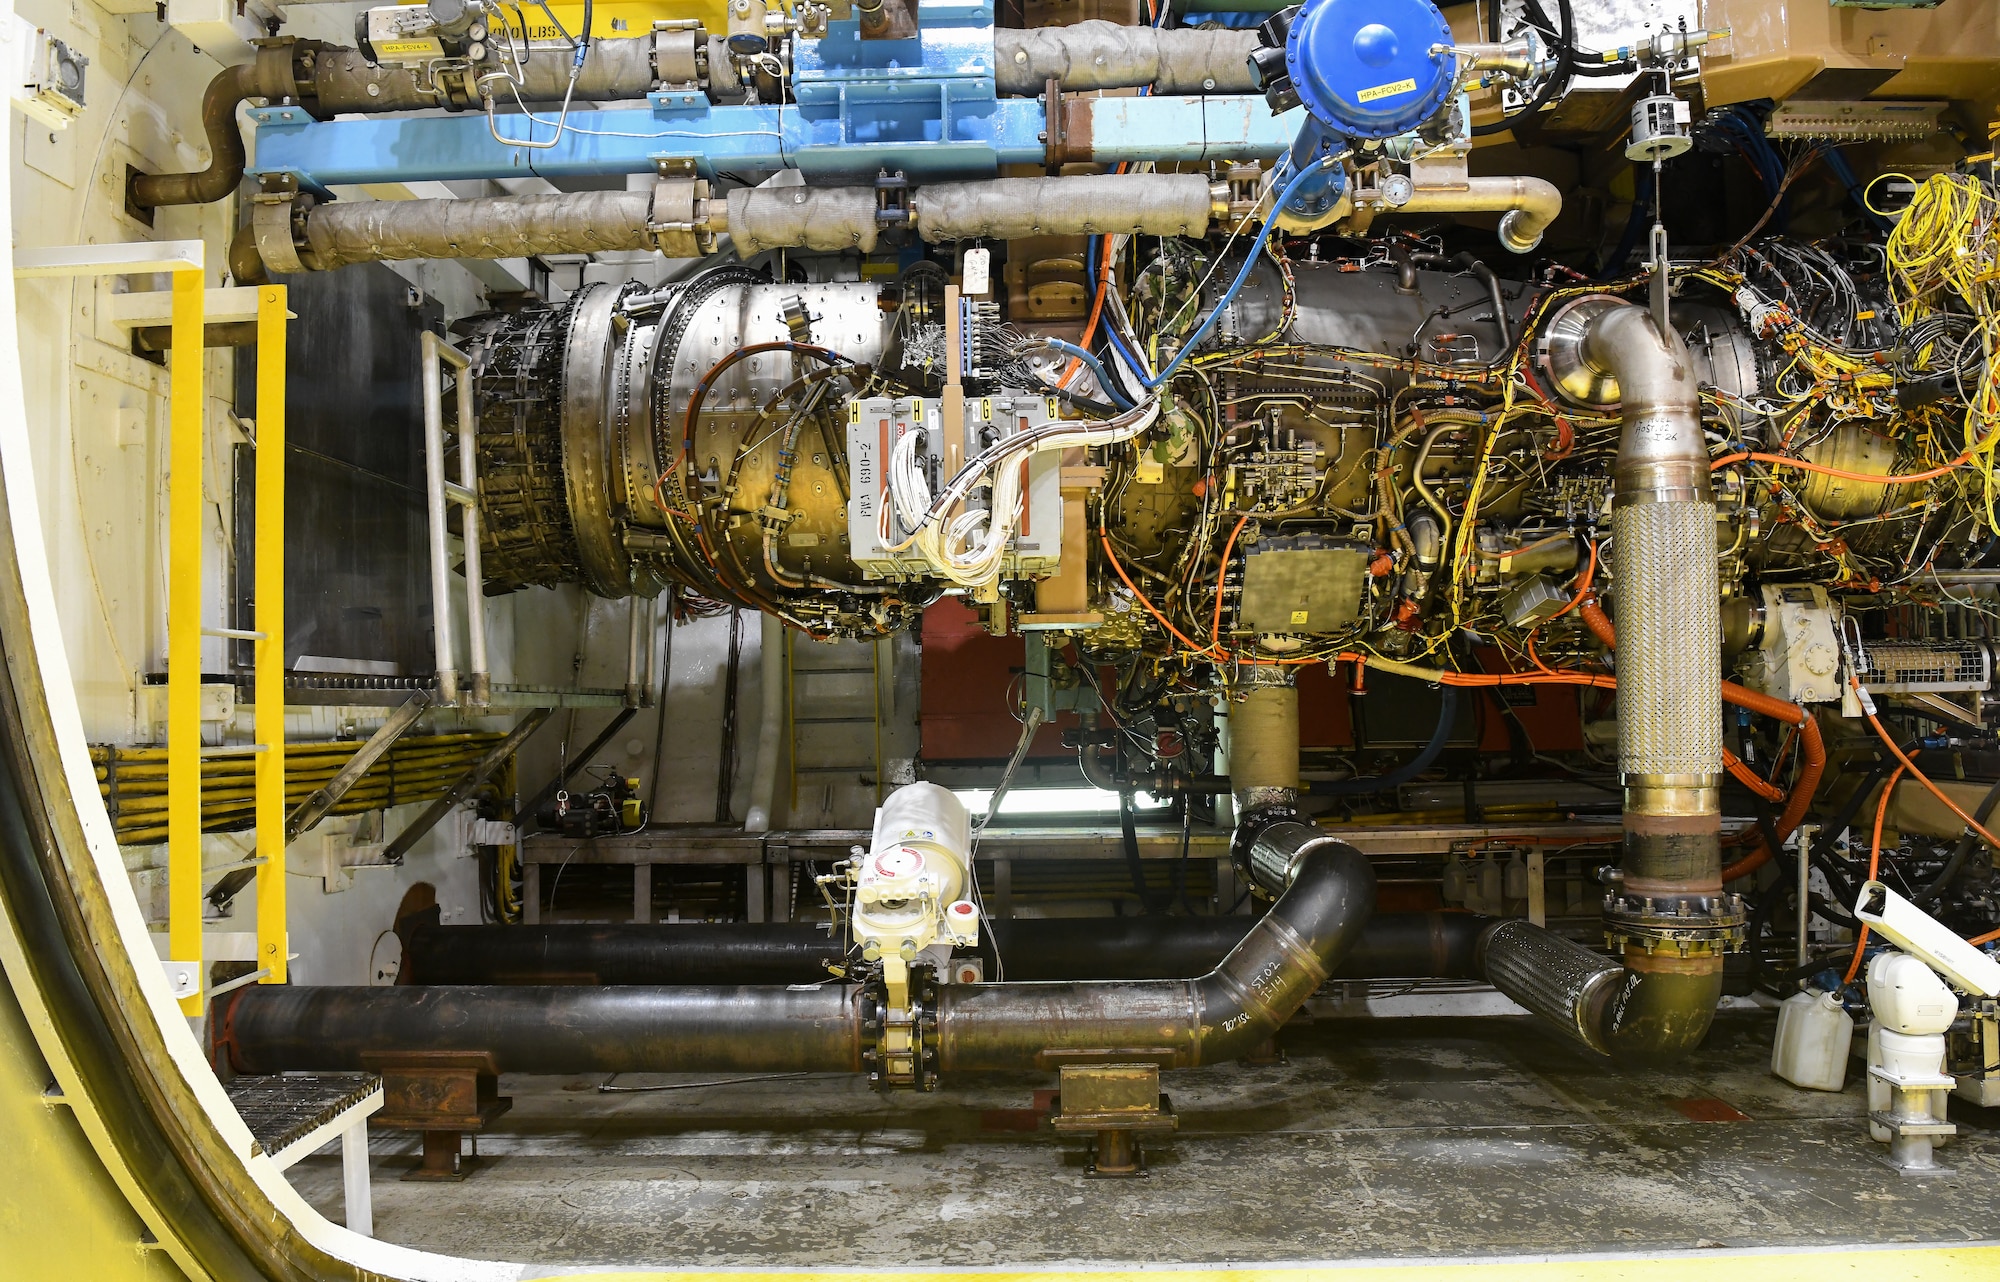 Testing of an F135 engine with a new rotor design is continuing in the J2 test cell of the Engine Test Facility at Arnold Air Force Base, Tenn. The engine is shown in the test cell in this image taken Sept. 2, 2020. (U.S. Air Force photo by Jill Pickett)